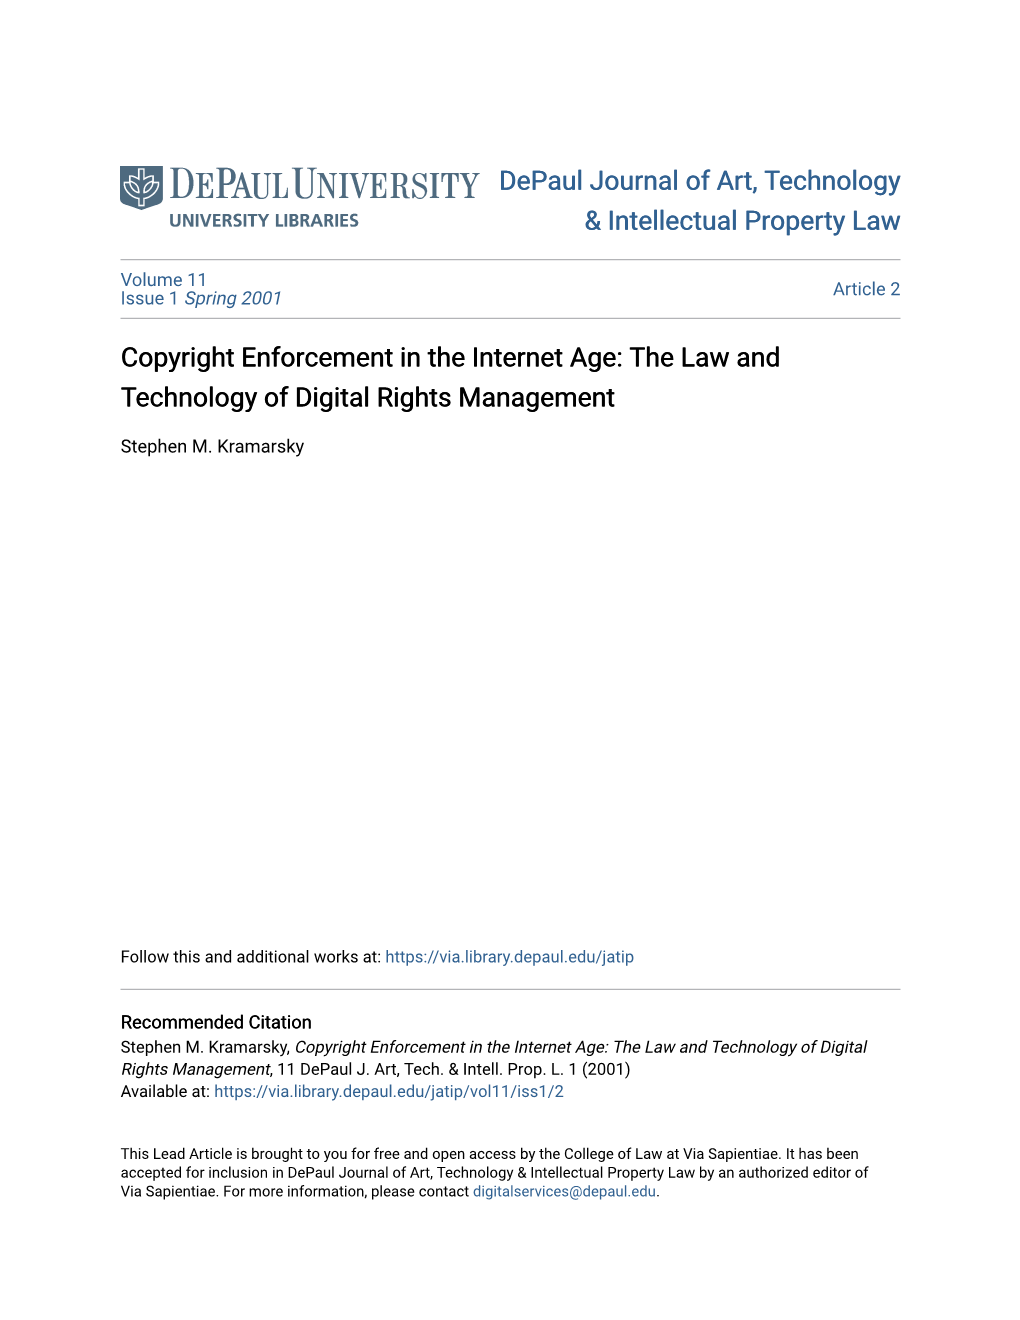 Copyright Enforcement in the Internet Age: the Law and Technology of Digital Rights Management